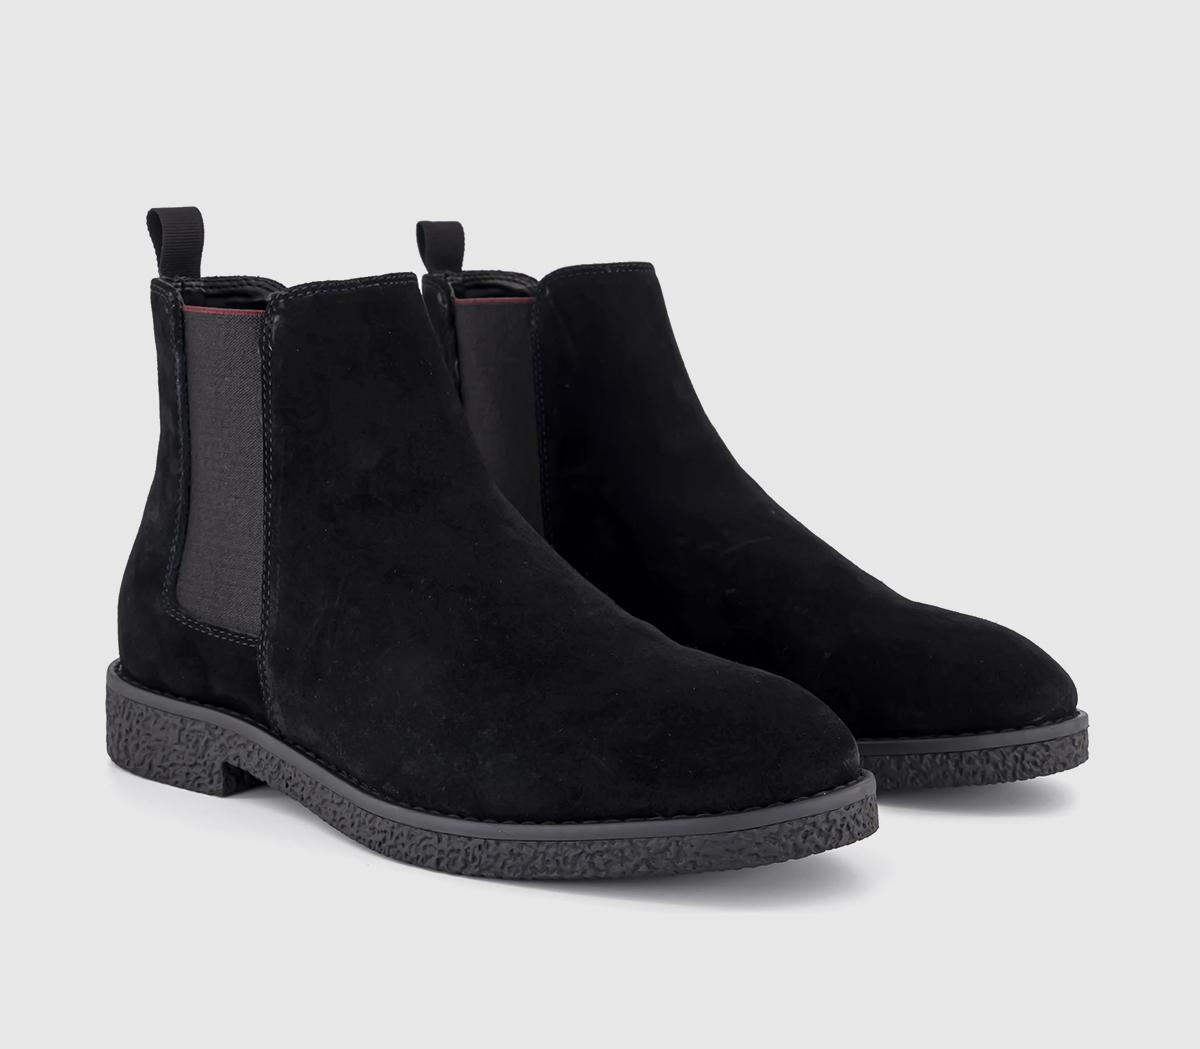 OFFICE Mens Bachelor Crepe Look Chelsea Boots Black Suede, 7